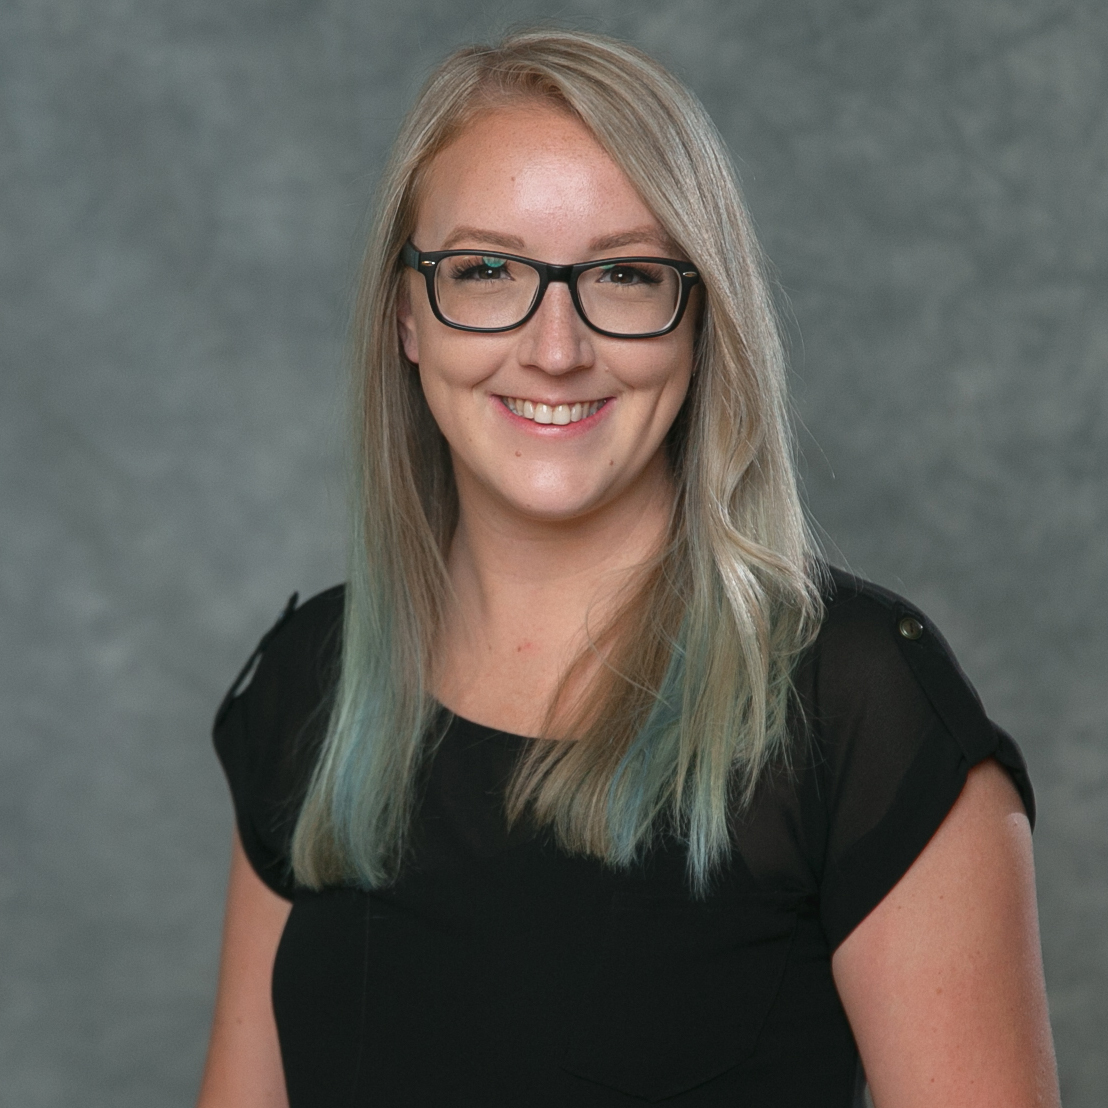 A.T. Still University-Arizona School of Health Sciences (ATSU-ASHS) Doctor of Physical Therapy program student Kayleigh Bates, ’23